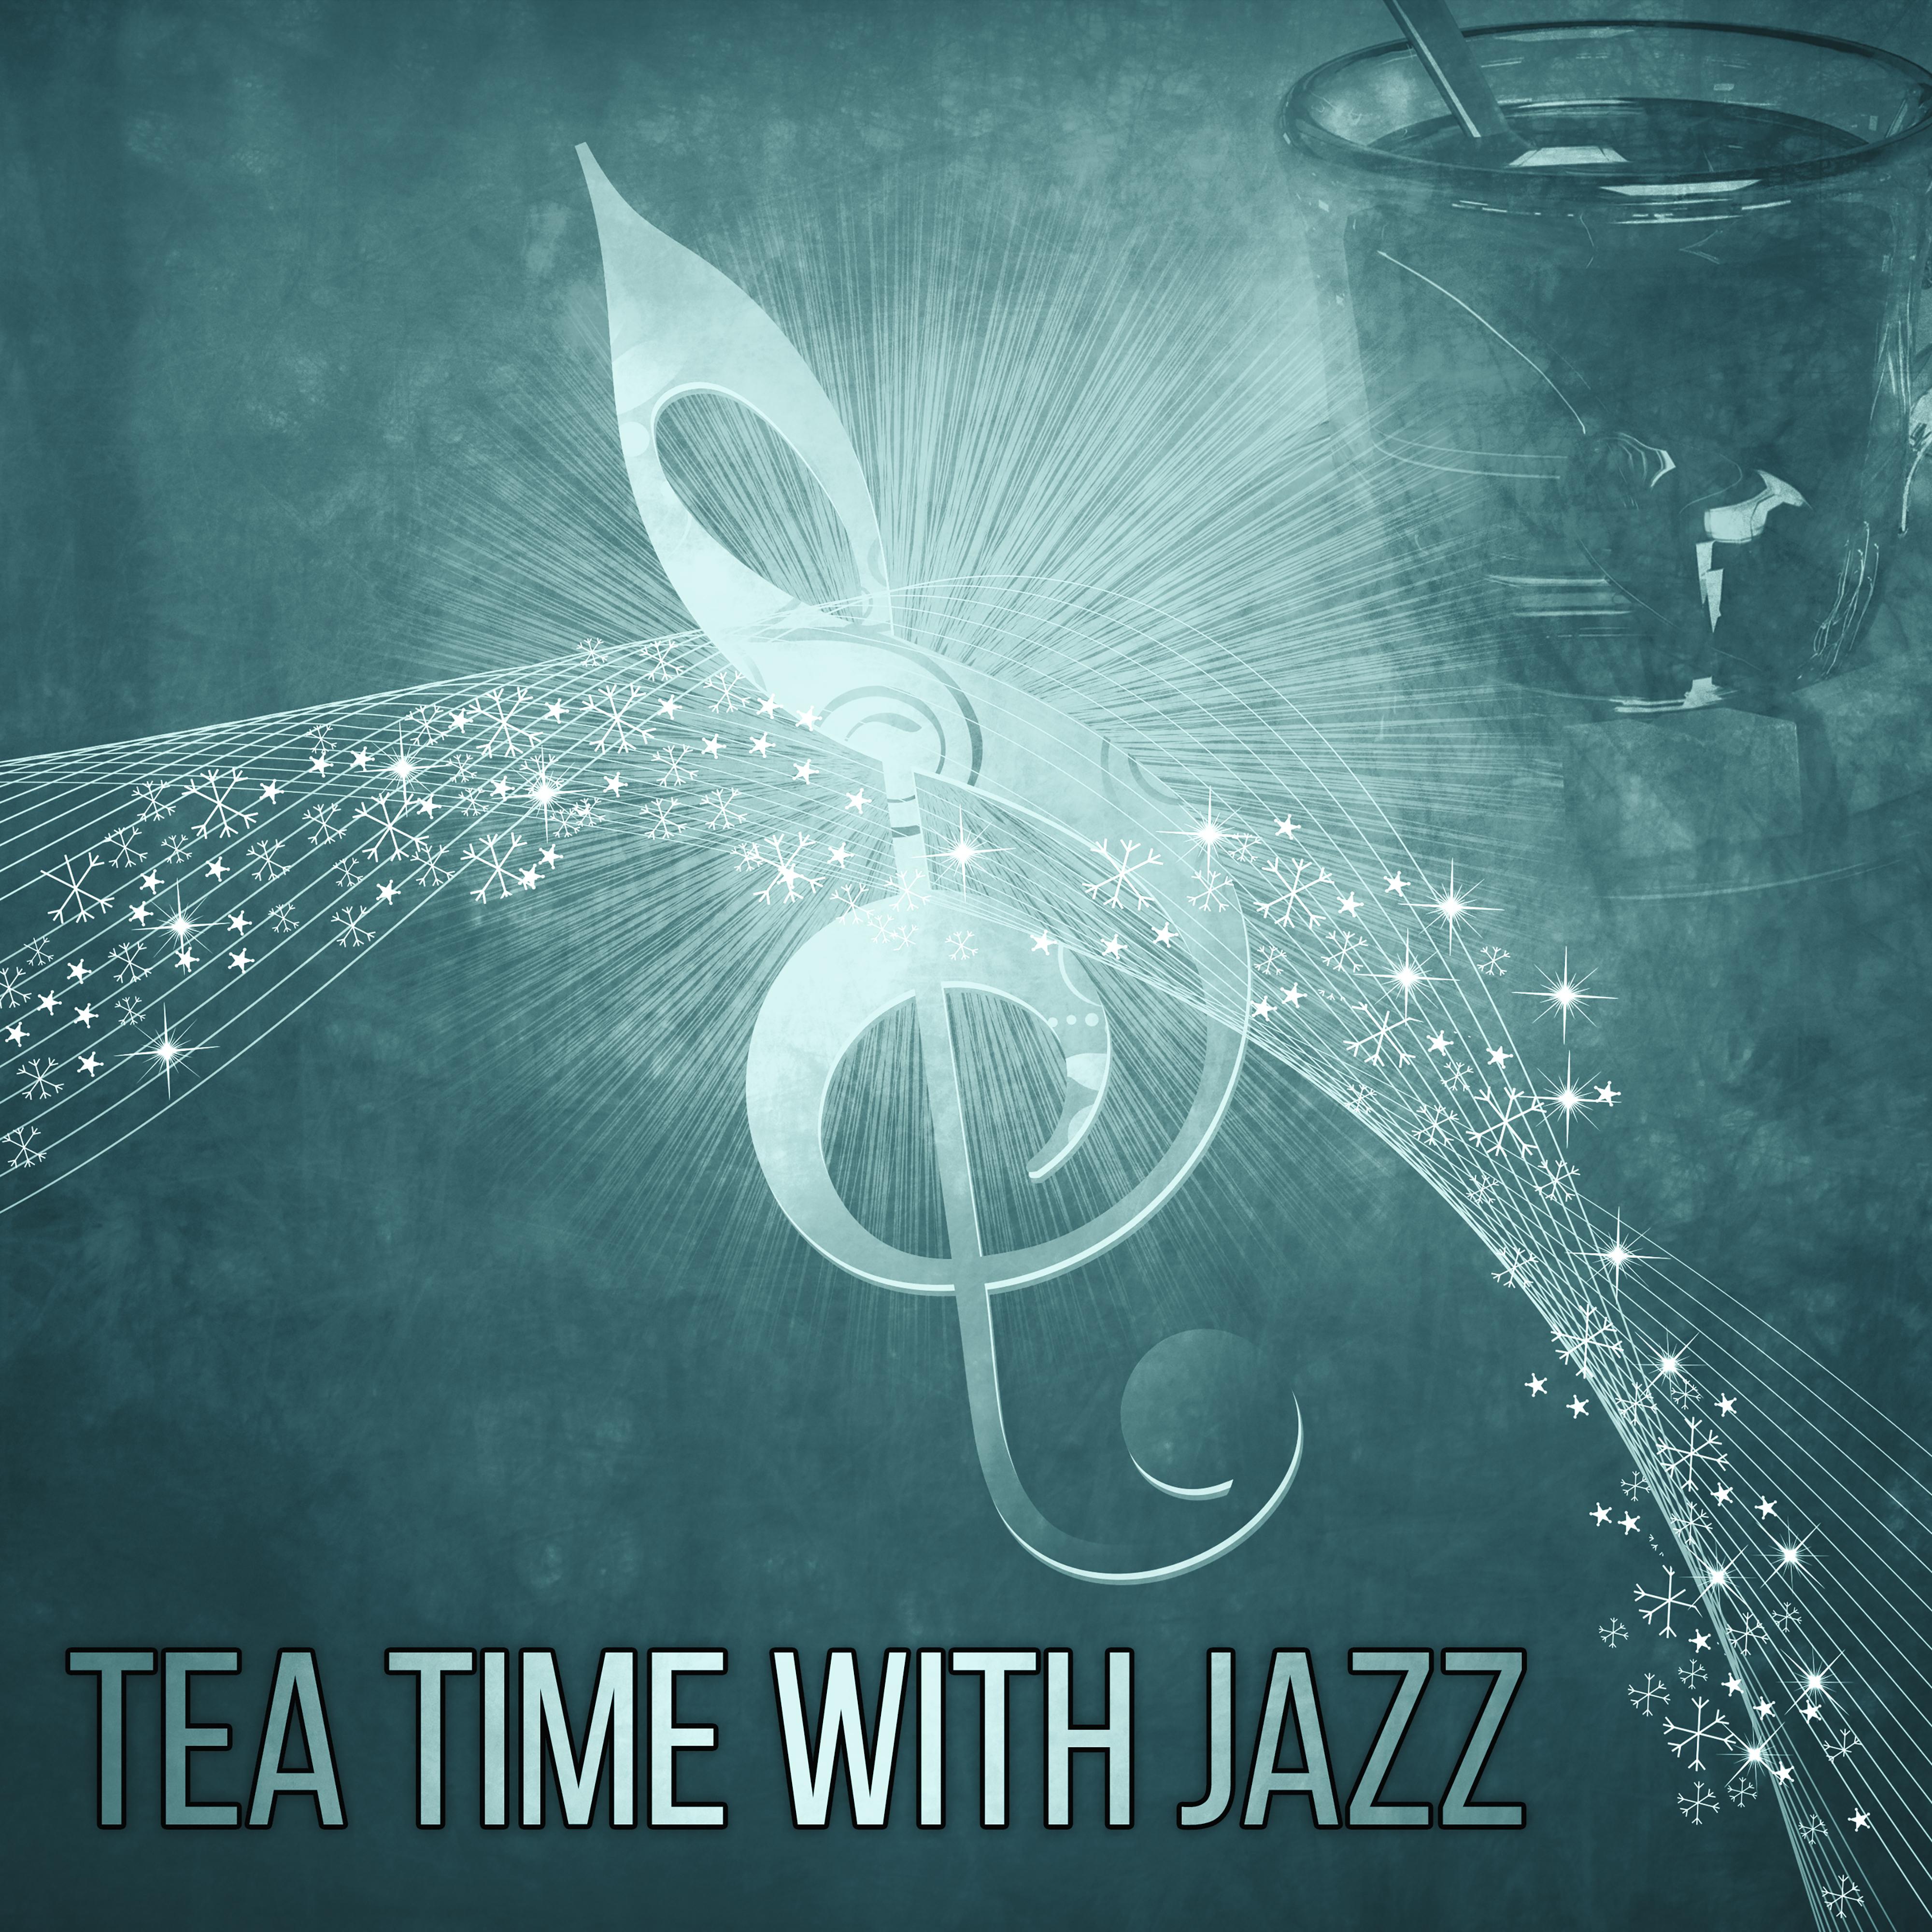 Tea Time with Jazz  Mellow Jazz Sounds, Relaxation Tea Time, Pure Instrumental, Jazz Lounge